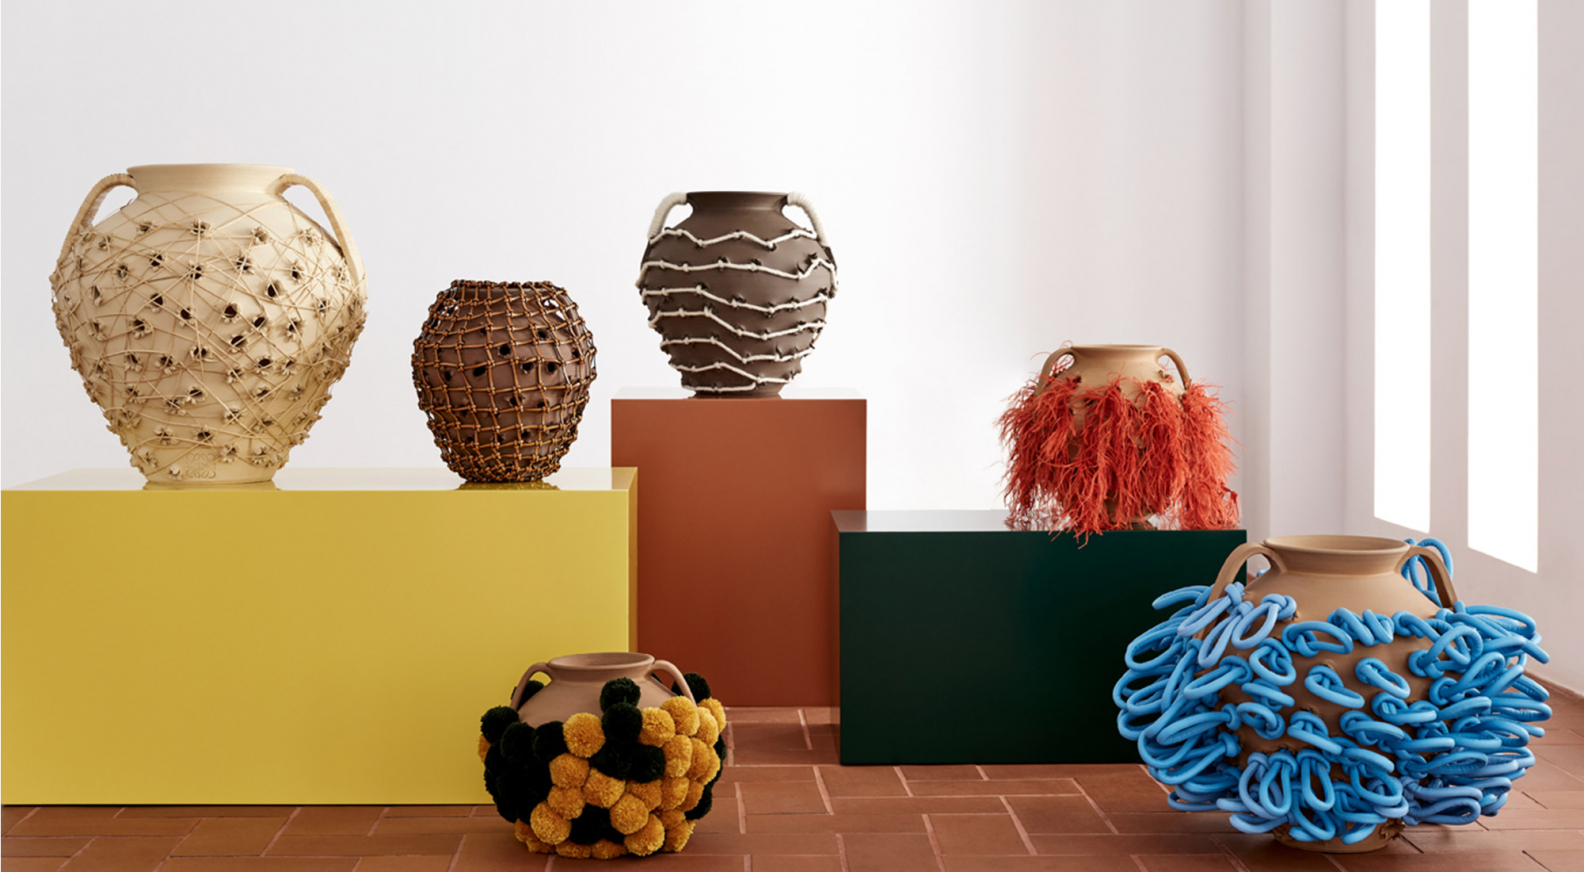 Exceptional collaboration between Loewe and Sotheby's for LOEWE